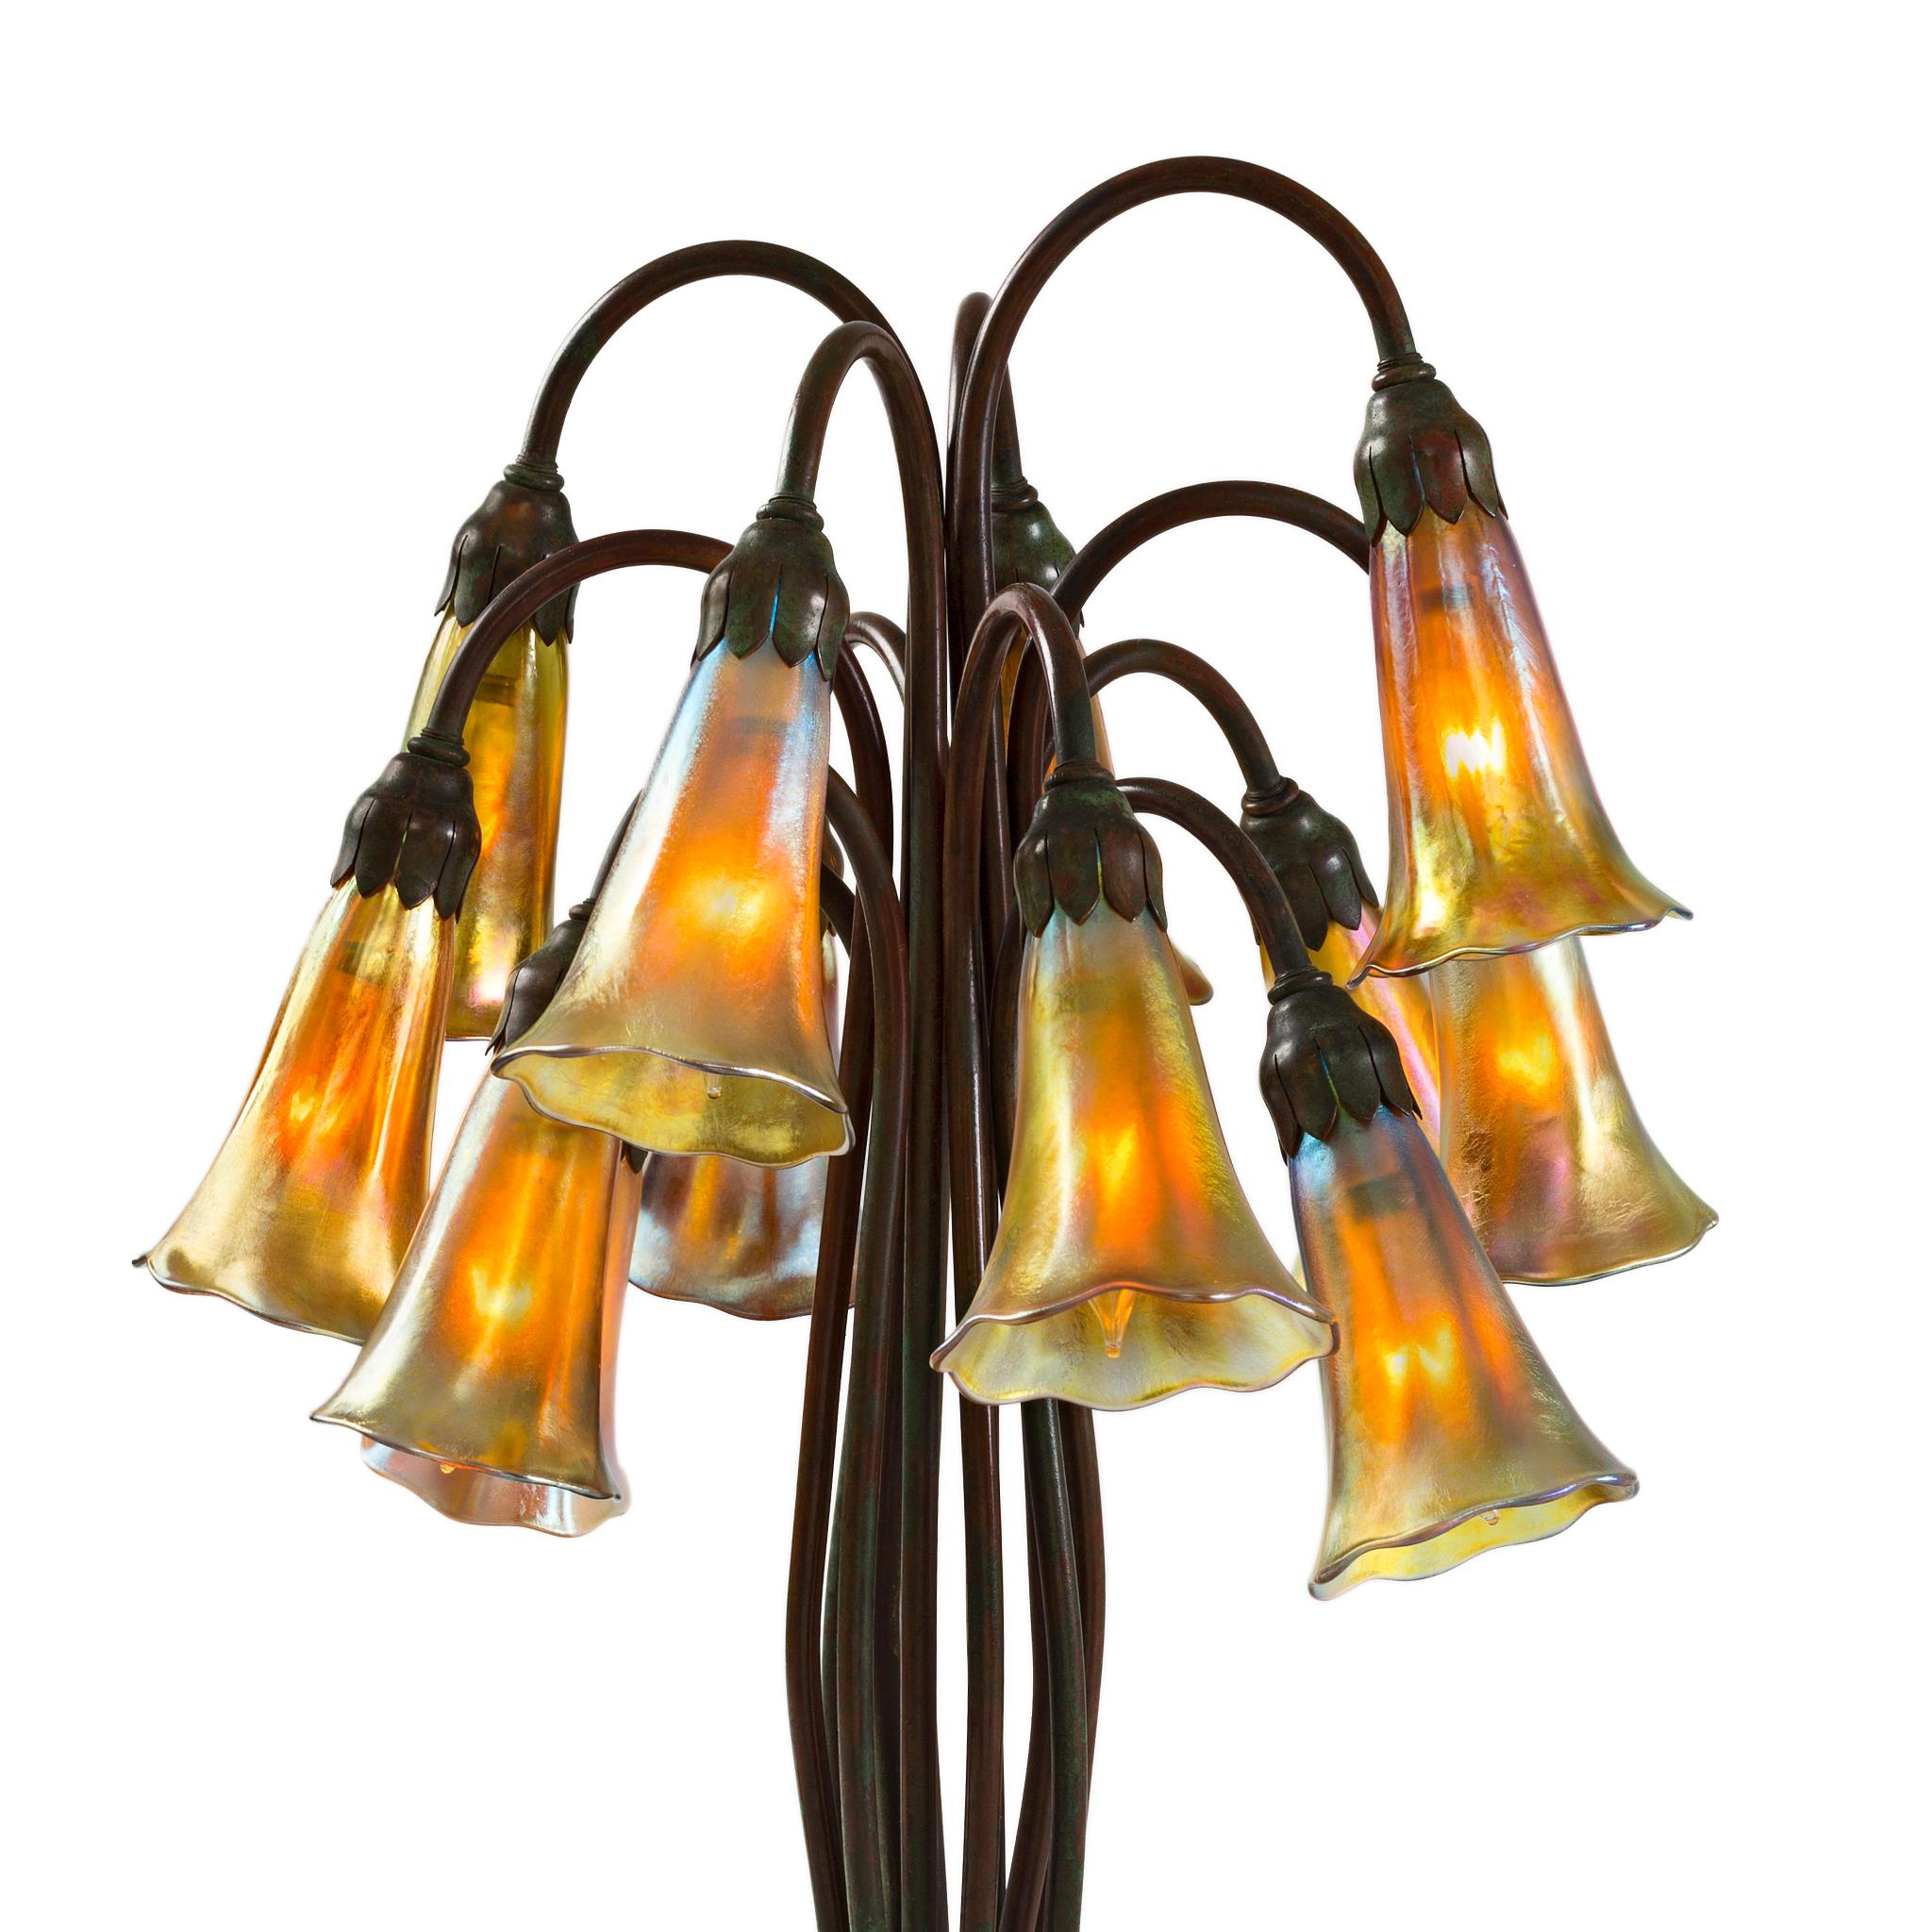 This Tiffany Studios New York glass and bronze 